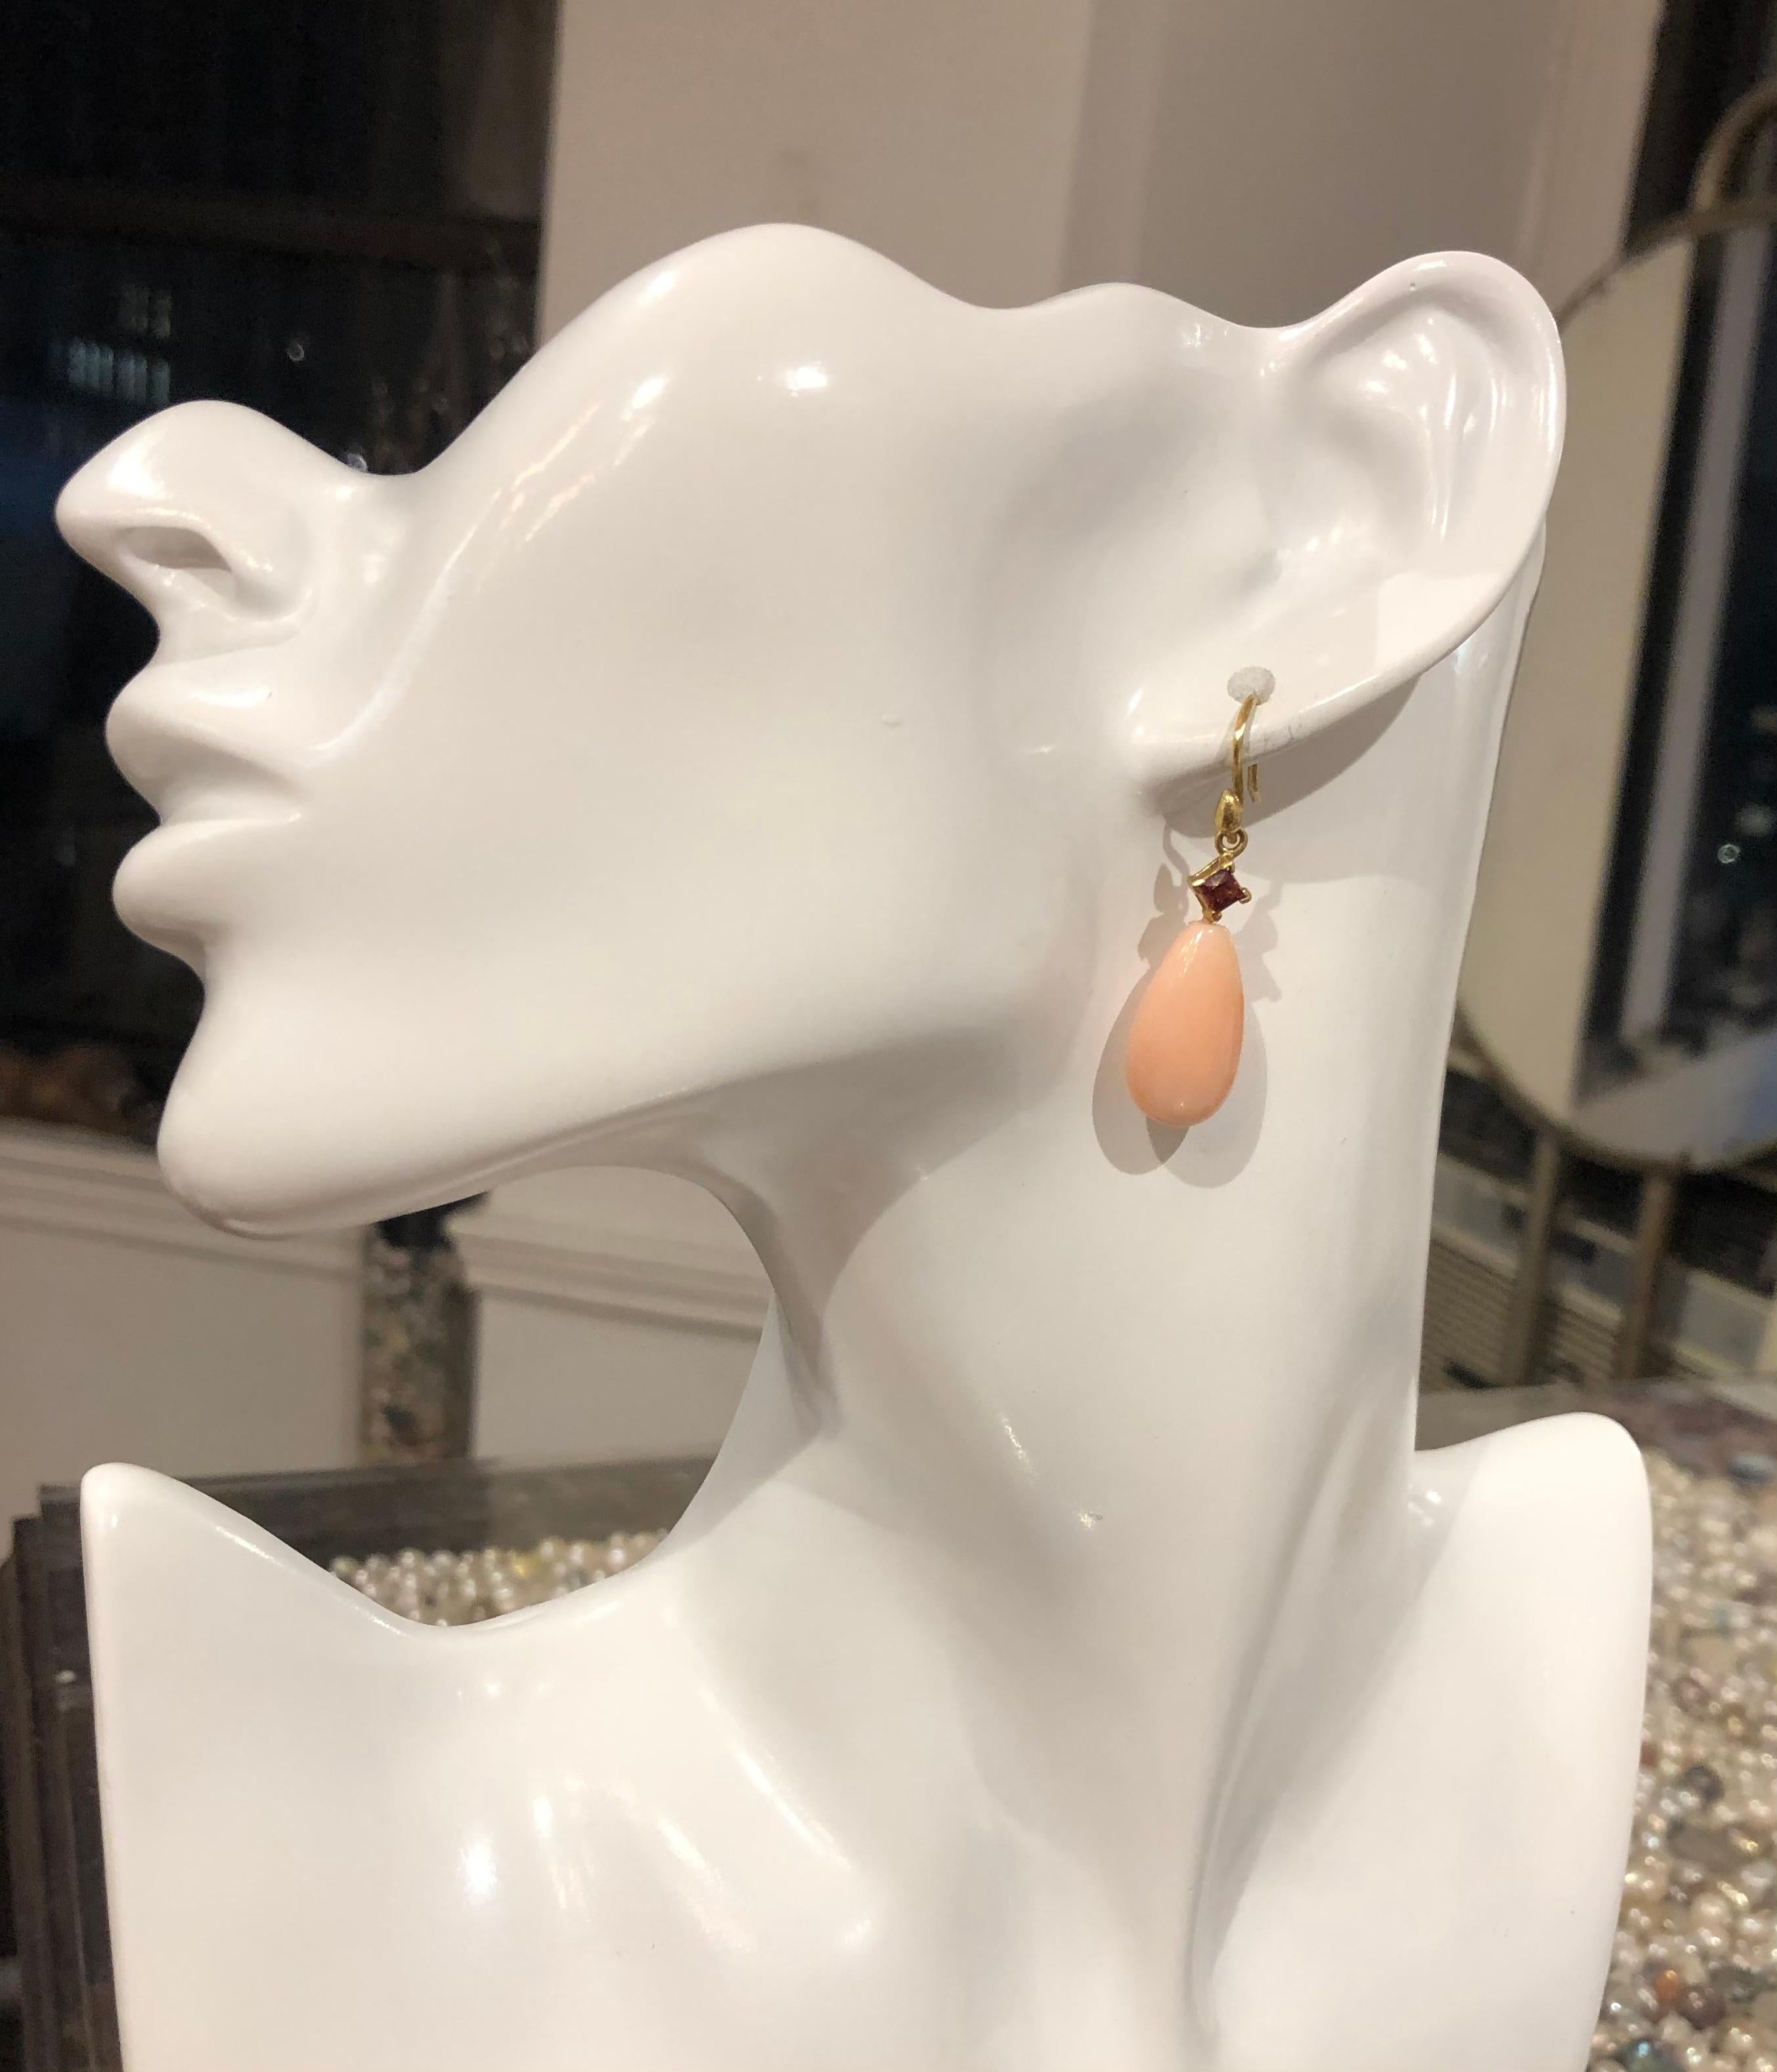 Whisper pale pure angel coral for the most feminine of jewelry looks, these teardrops are enhanced with crimson colored princess cut sapphires.

GS93CrlCrSapp — 22x12.5mm smooth antique pink coral teardrop topped with crimson princess cut sapphire,